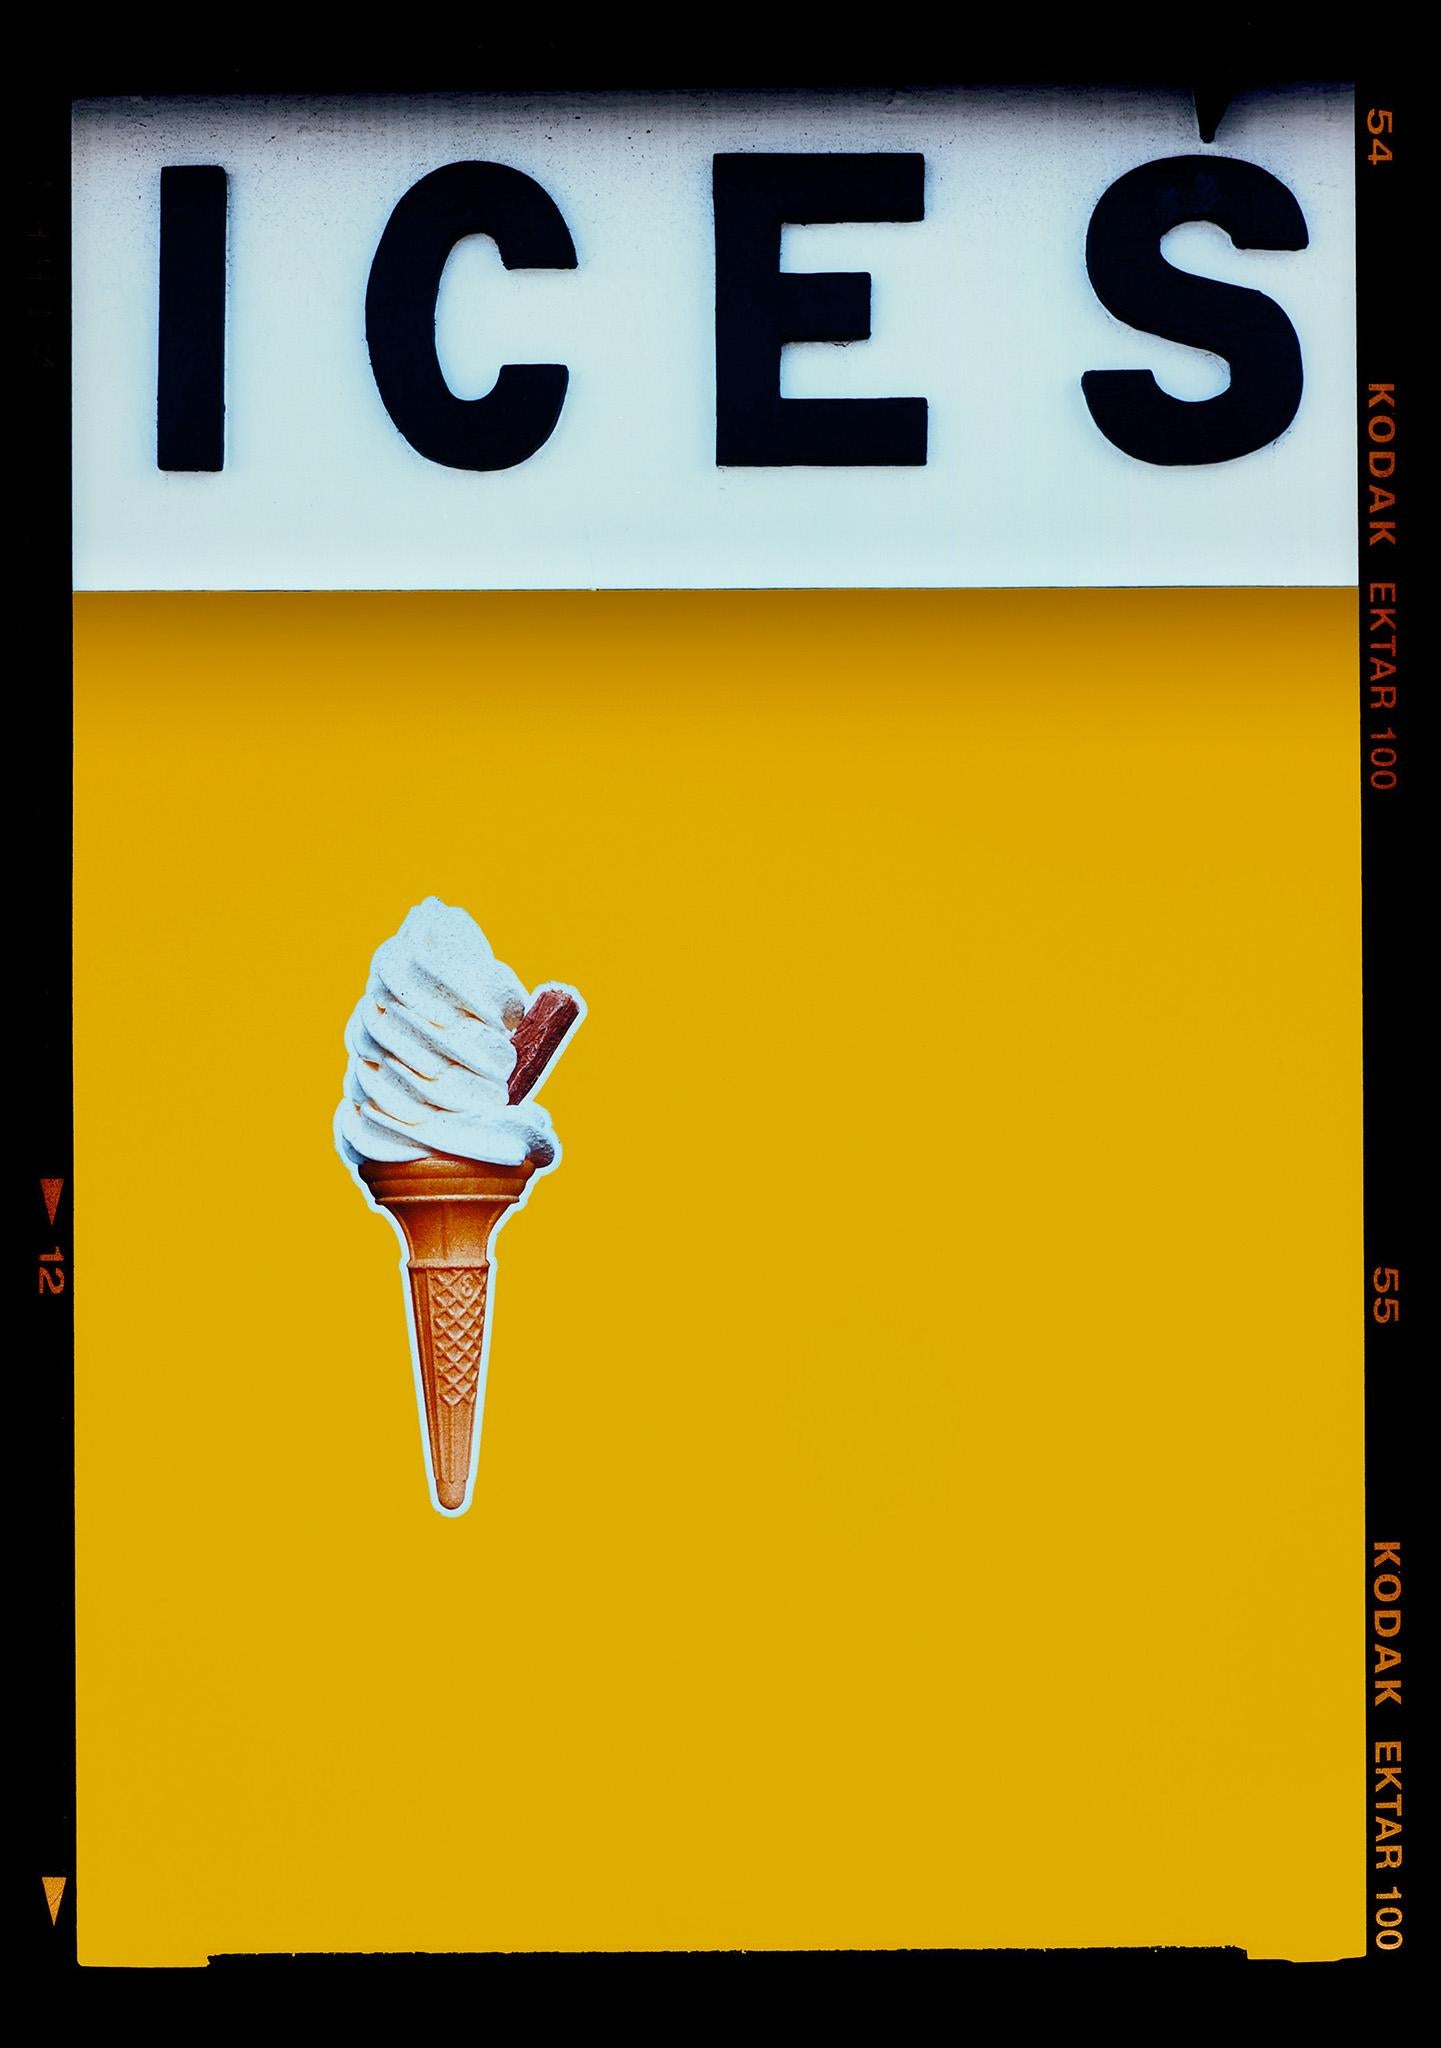 Richard Heeps Print - Ices (Mustard Yellow), Bexhill-on-Sea - British seaside color photography